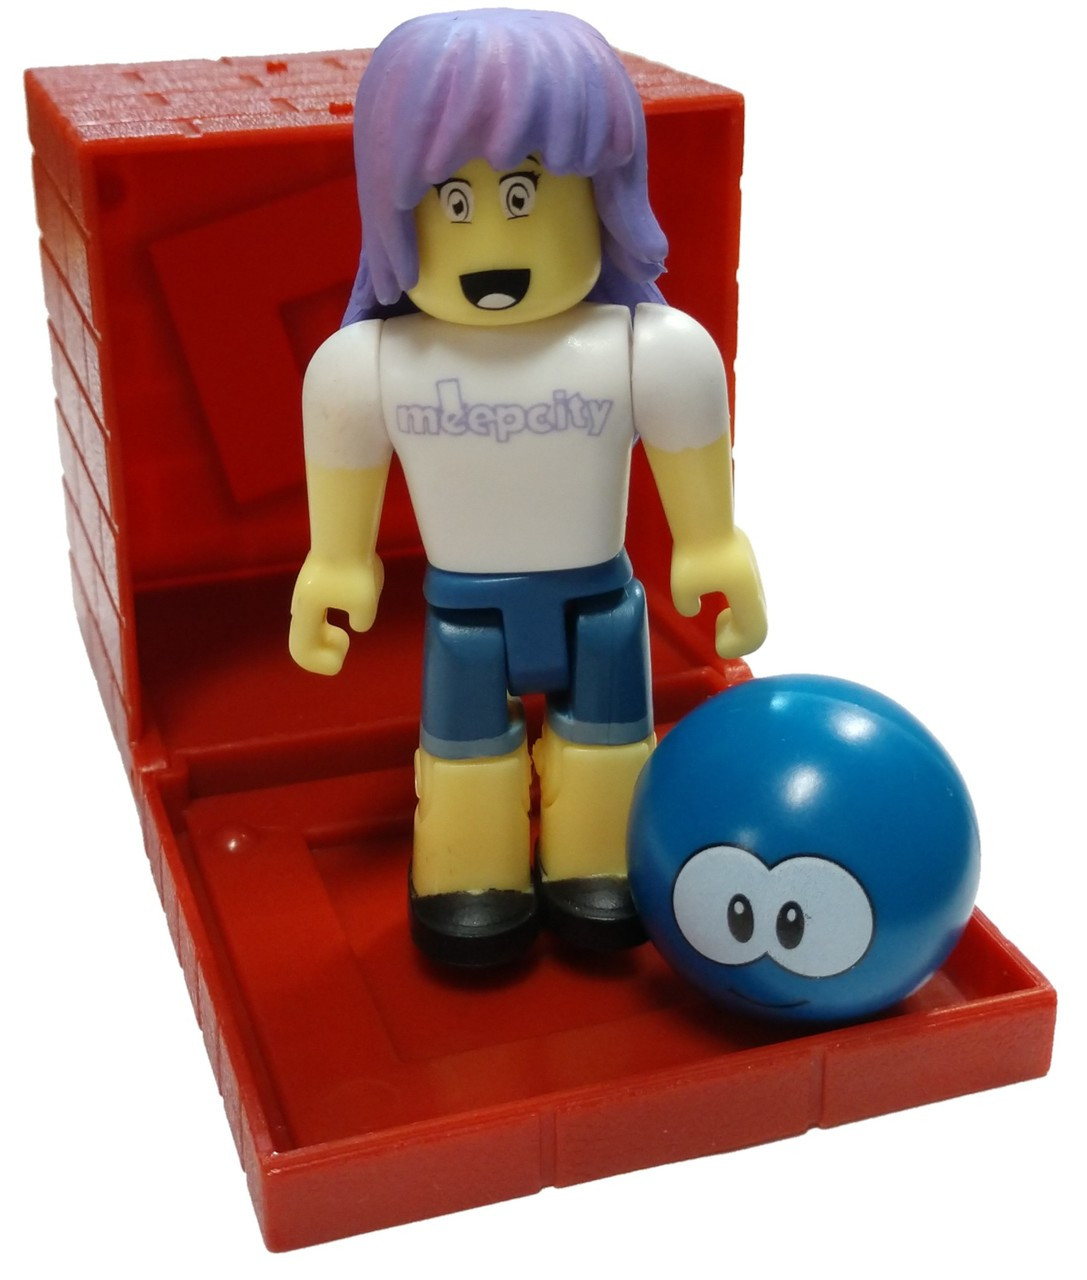 Roblox Red Series 4 Meepcity Pet Seller 3 Mini Figure With Red Cube And Online Code Loose Jazwares Toywiz - red invasion roblox